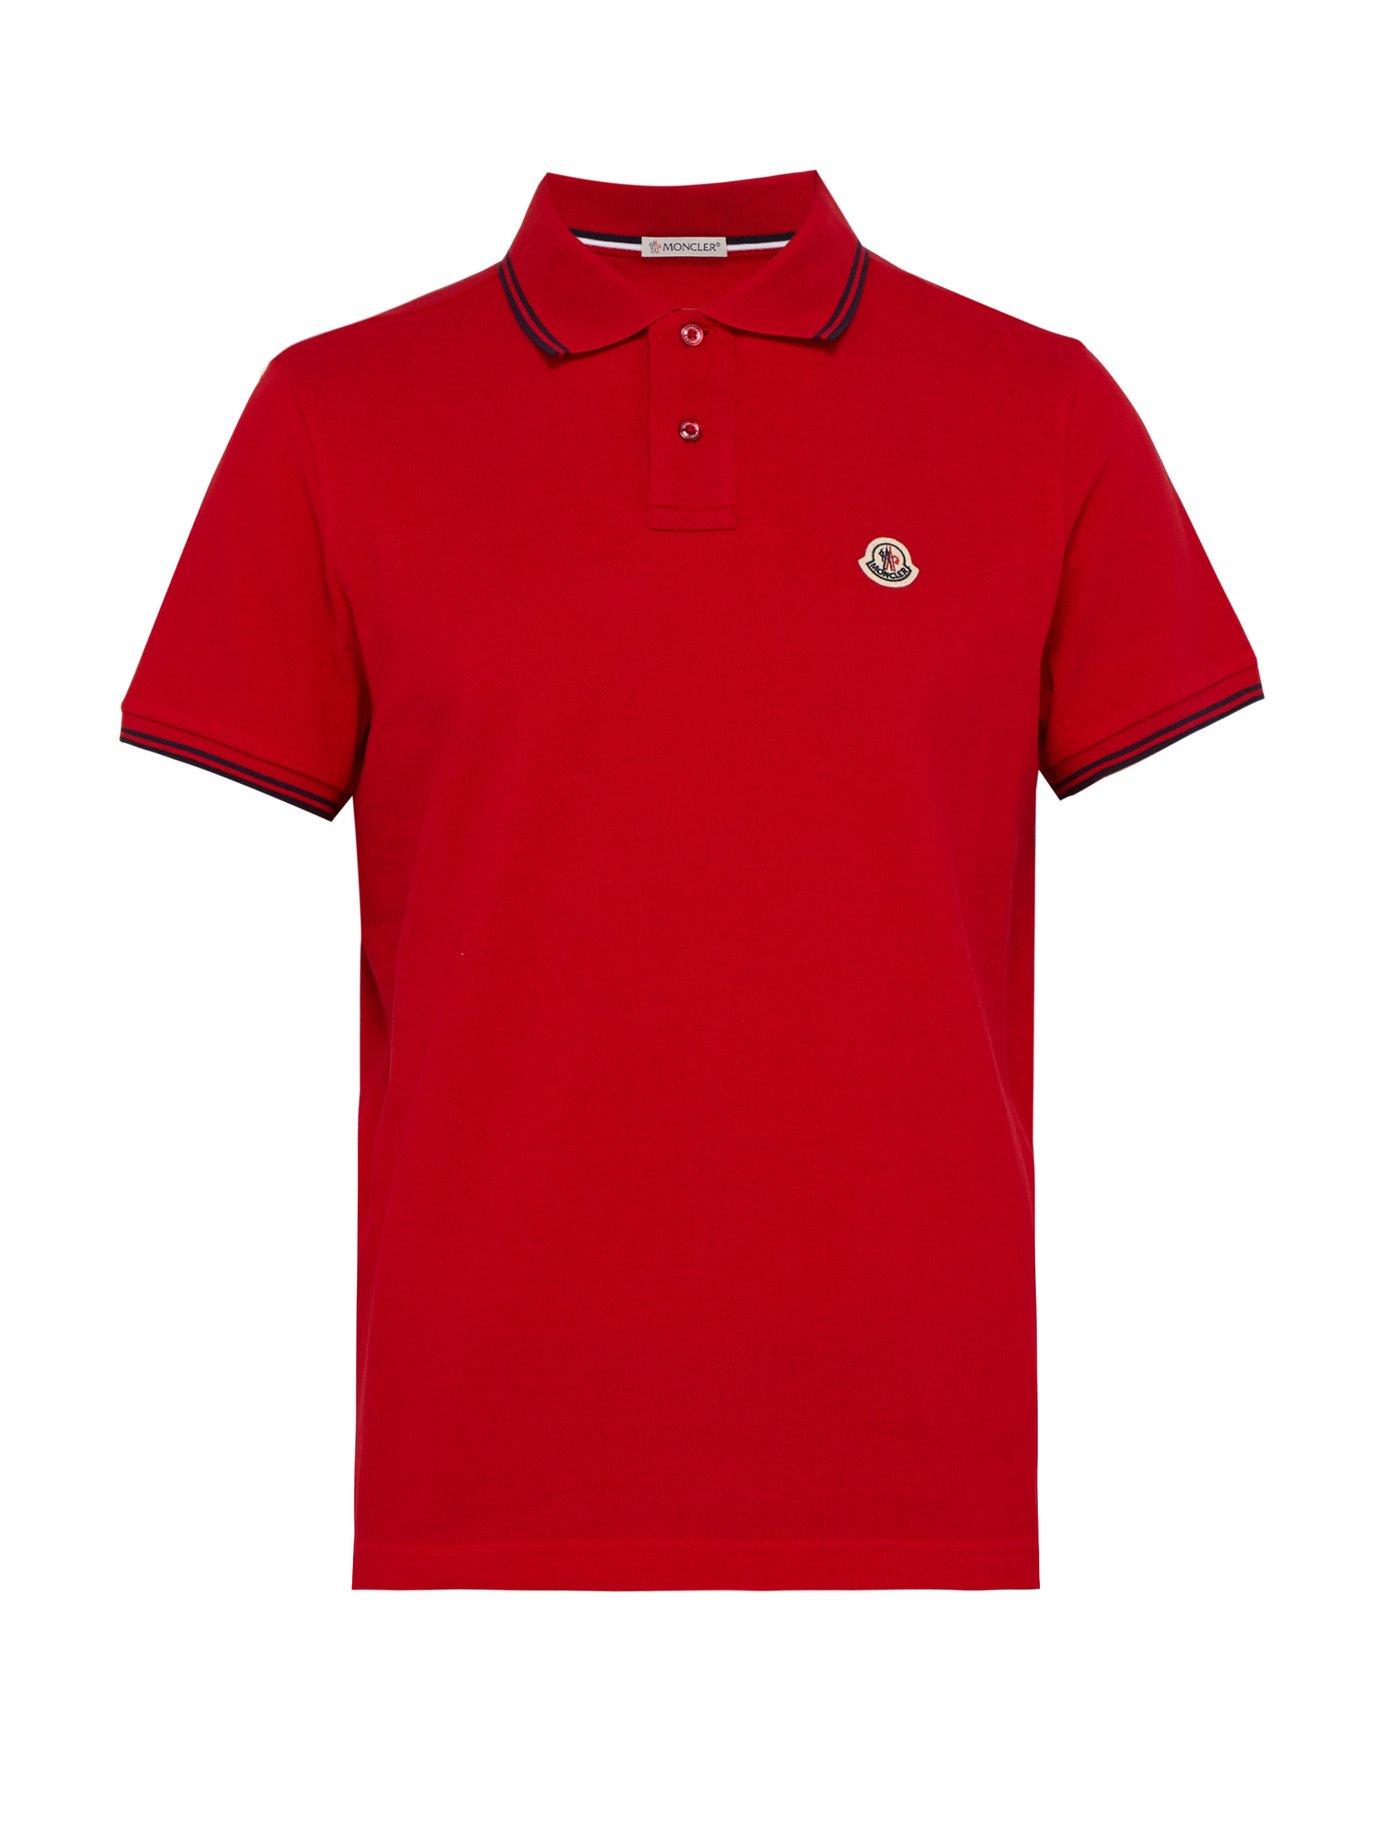 Moncler Tipped Cotton Piqué Polo Shirt in Red for Men - Lyst